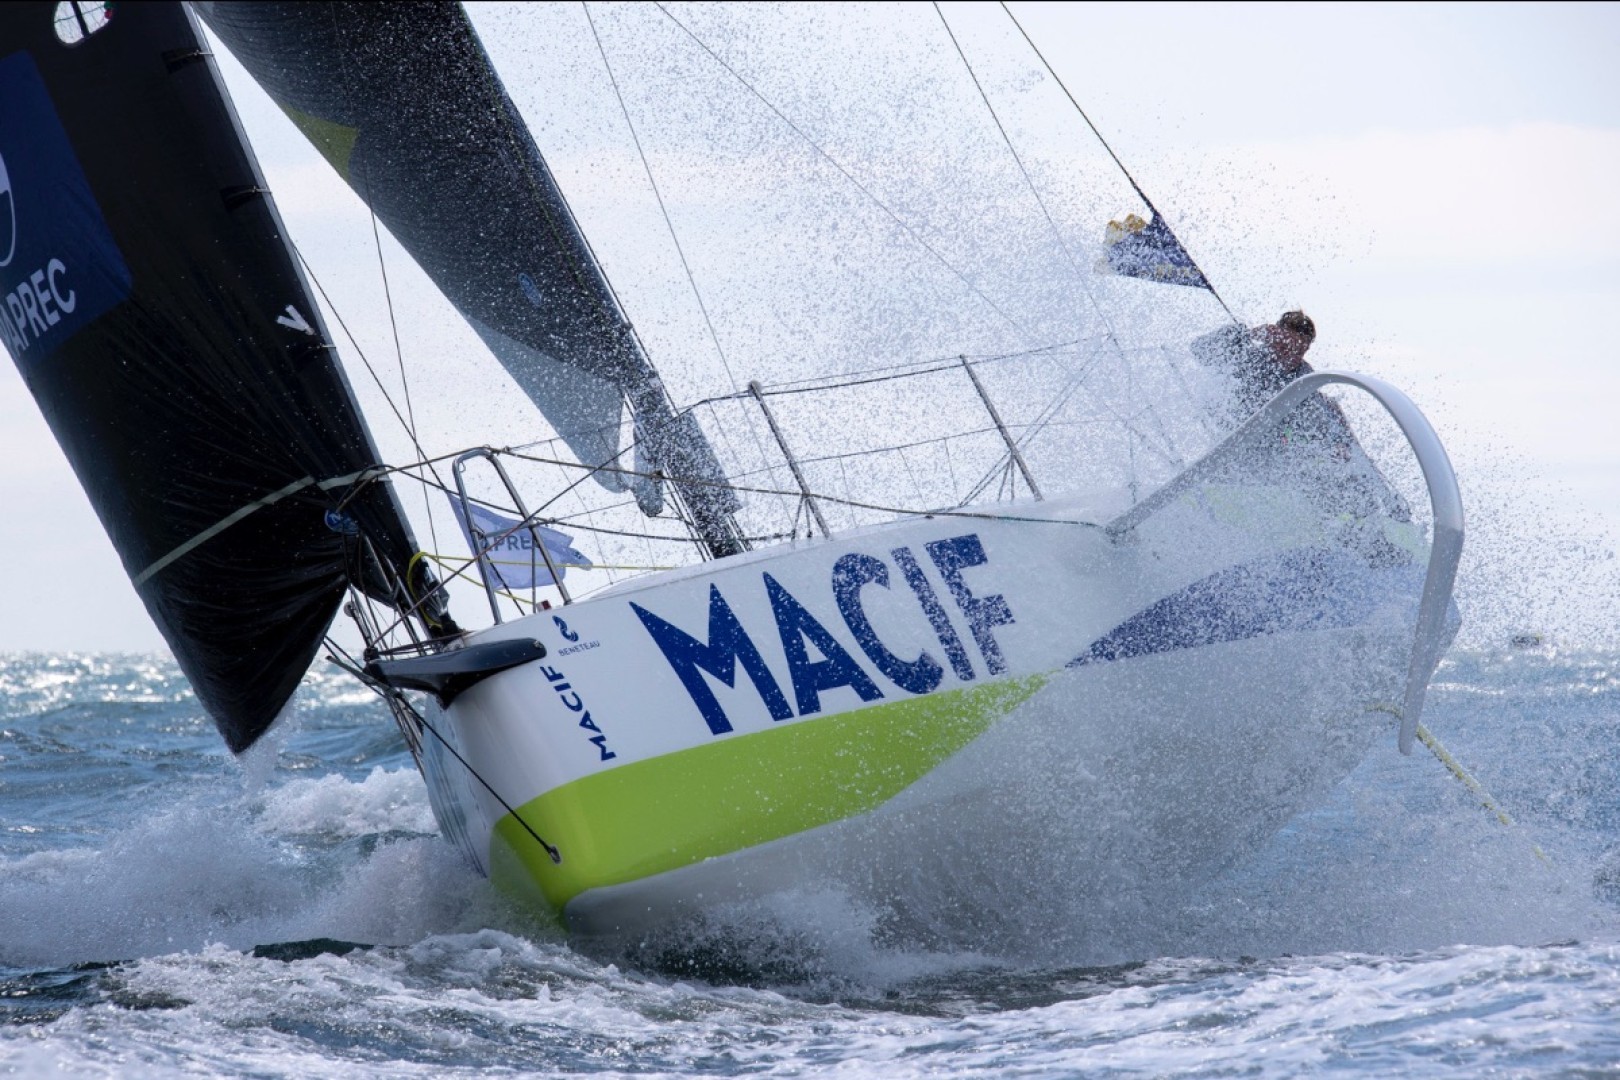 Skipper Macif in action
© Alexis Courcoux